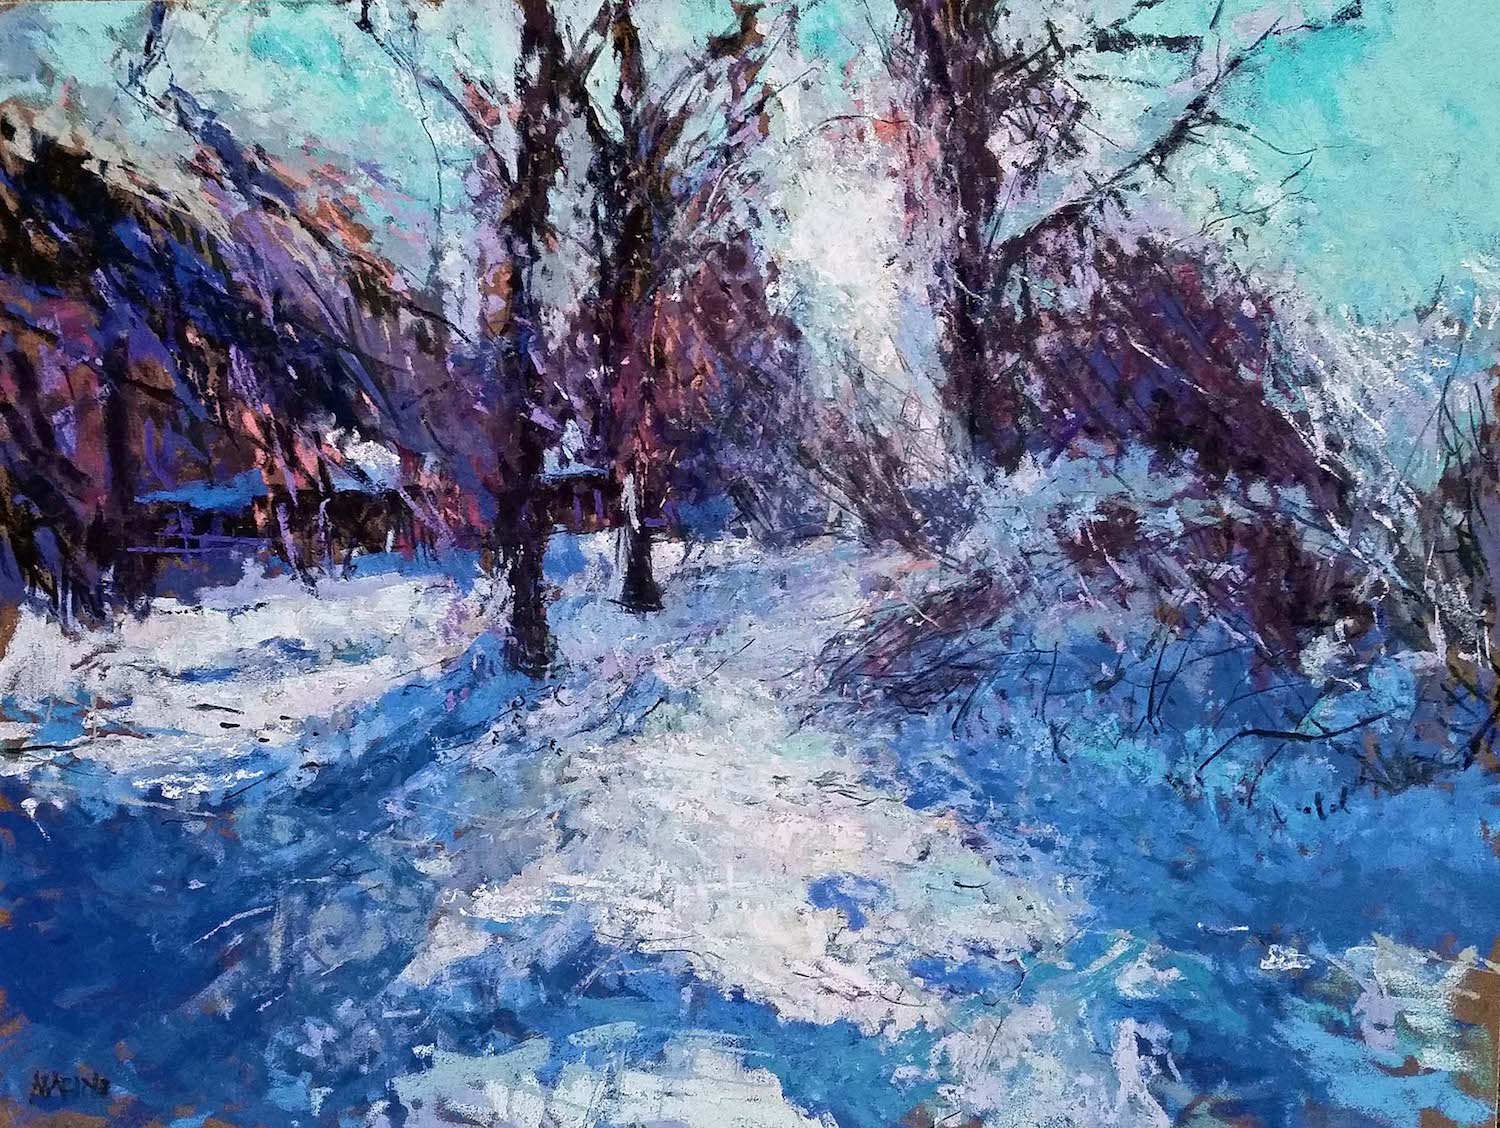 Maria Marino, "First Snow," pastel on LaCarte paper, 12 x 16 in. Sold